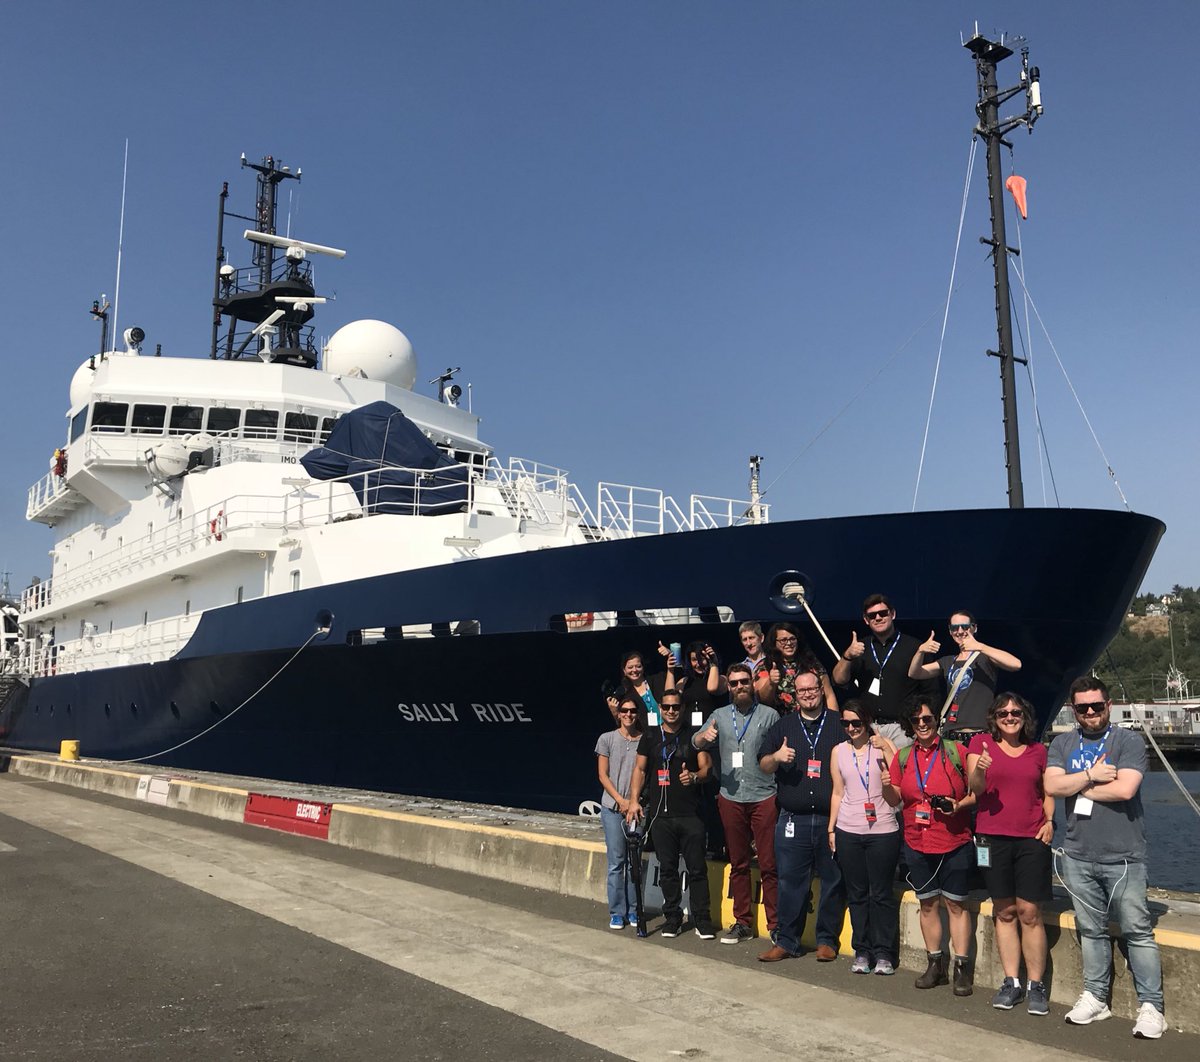 Participants from a NASA social media event pose by the R/V <em>Sally Ride</em> before it embarks on its August 2018 tour of the North Pacific.